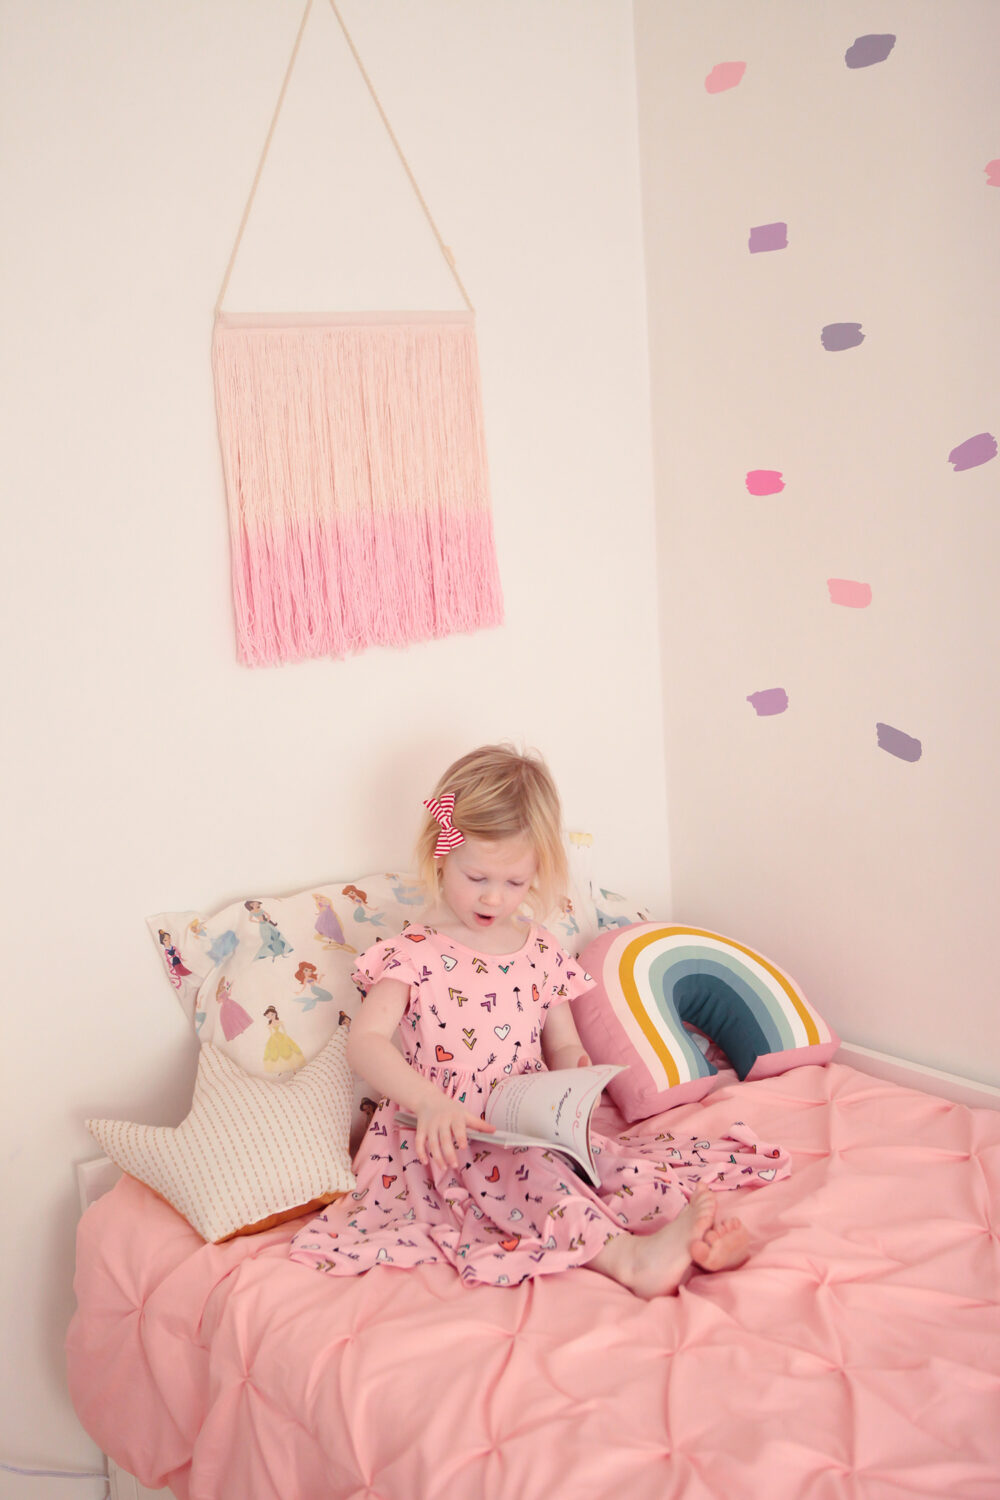 Are you looking to update your toddler's room? Check out how Los Angeles Lifestyle blogger, Lipgloss & Crayons gives her daughter a princess room makeover.